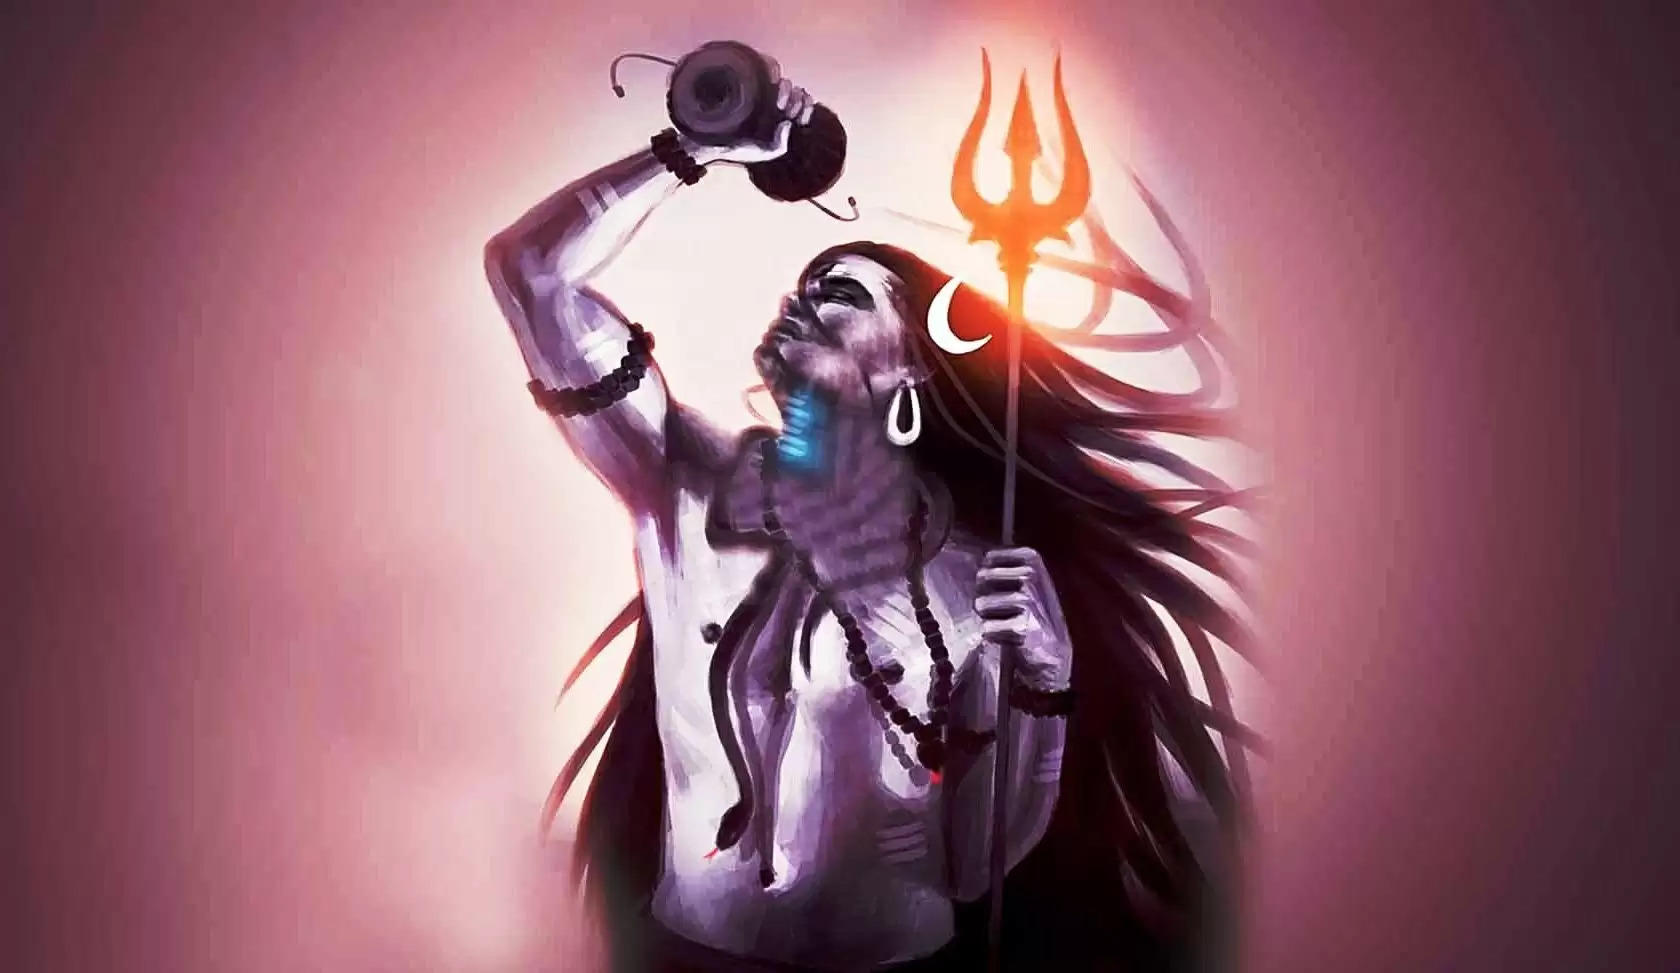 shiv puja for happiness and prosperity do these upay